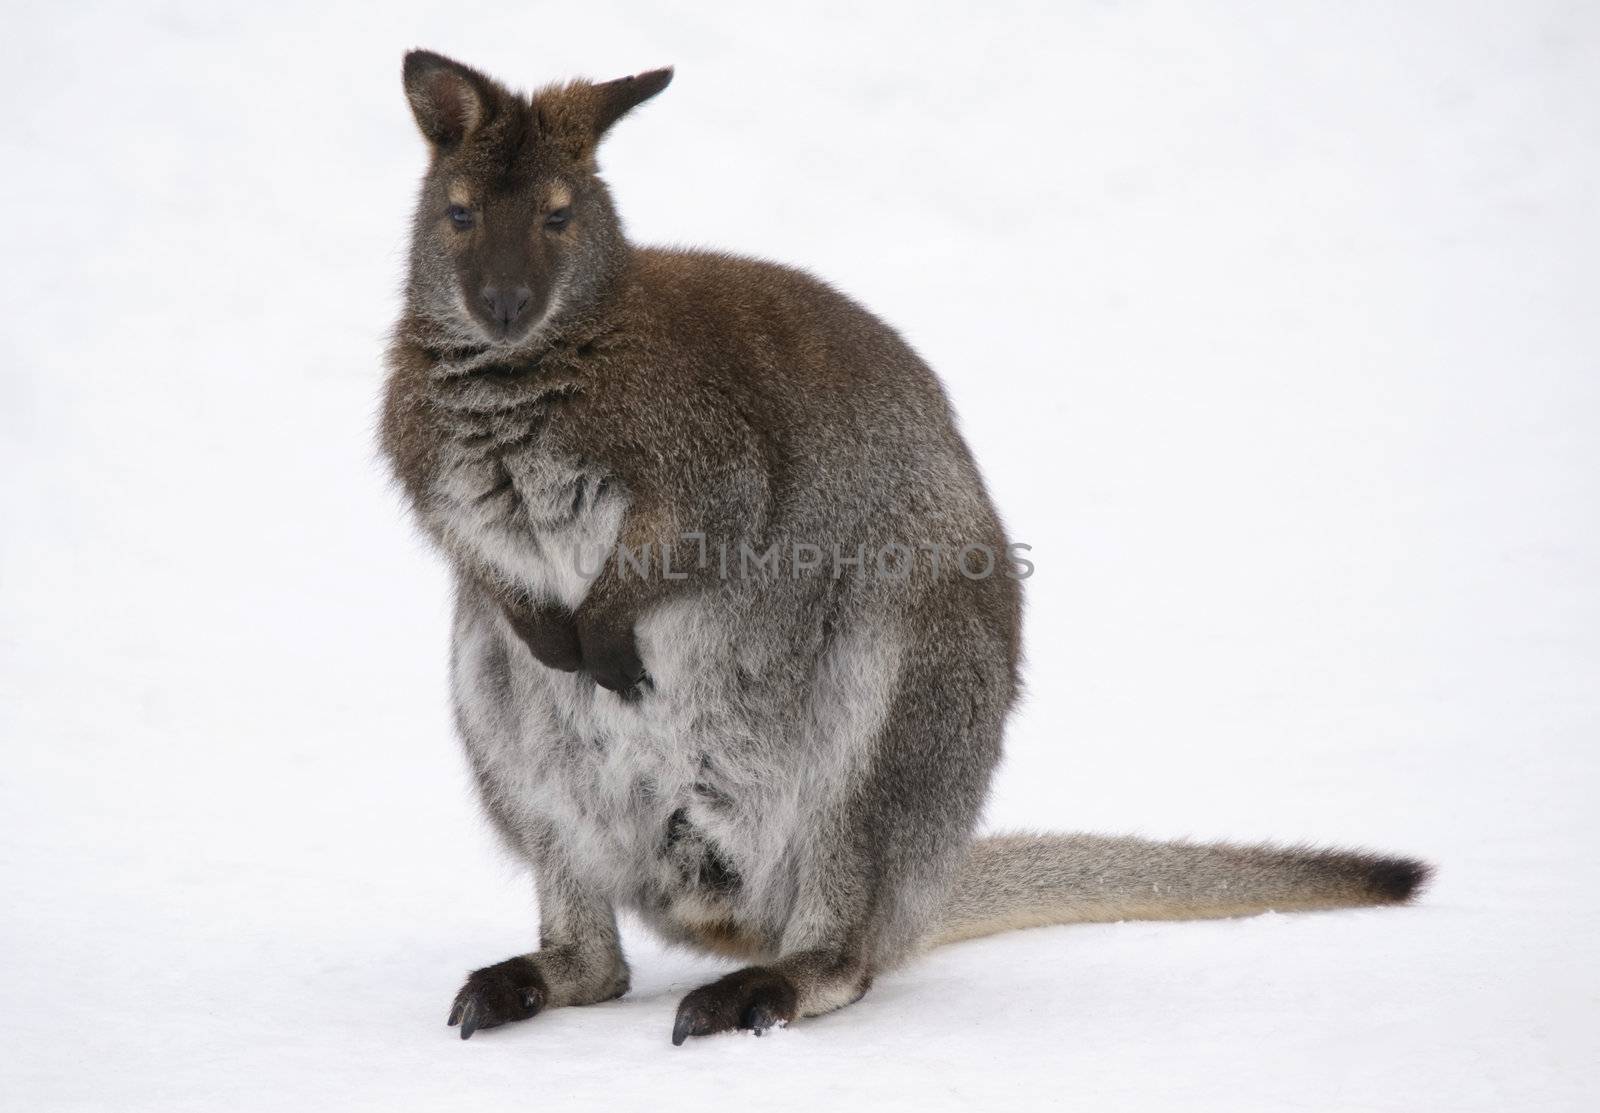 Picture of a kangaroo in the snow in winter